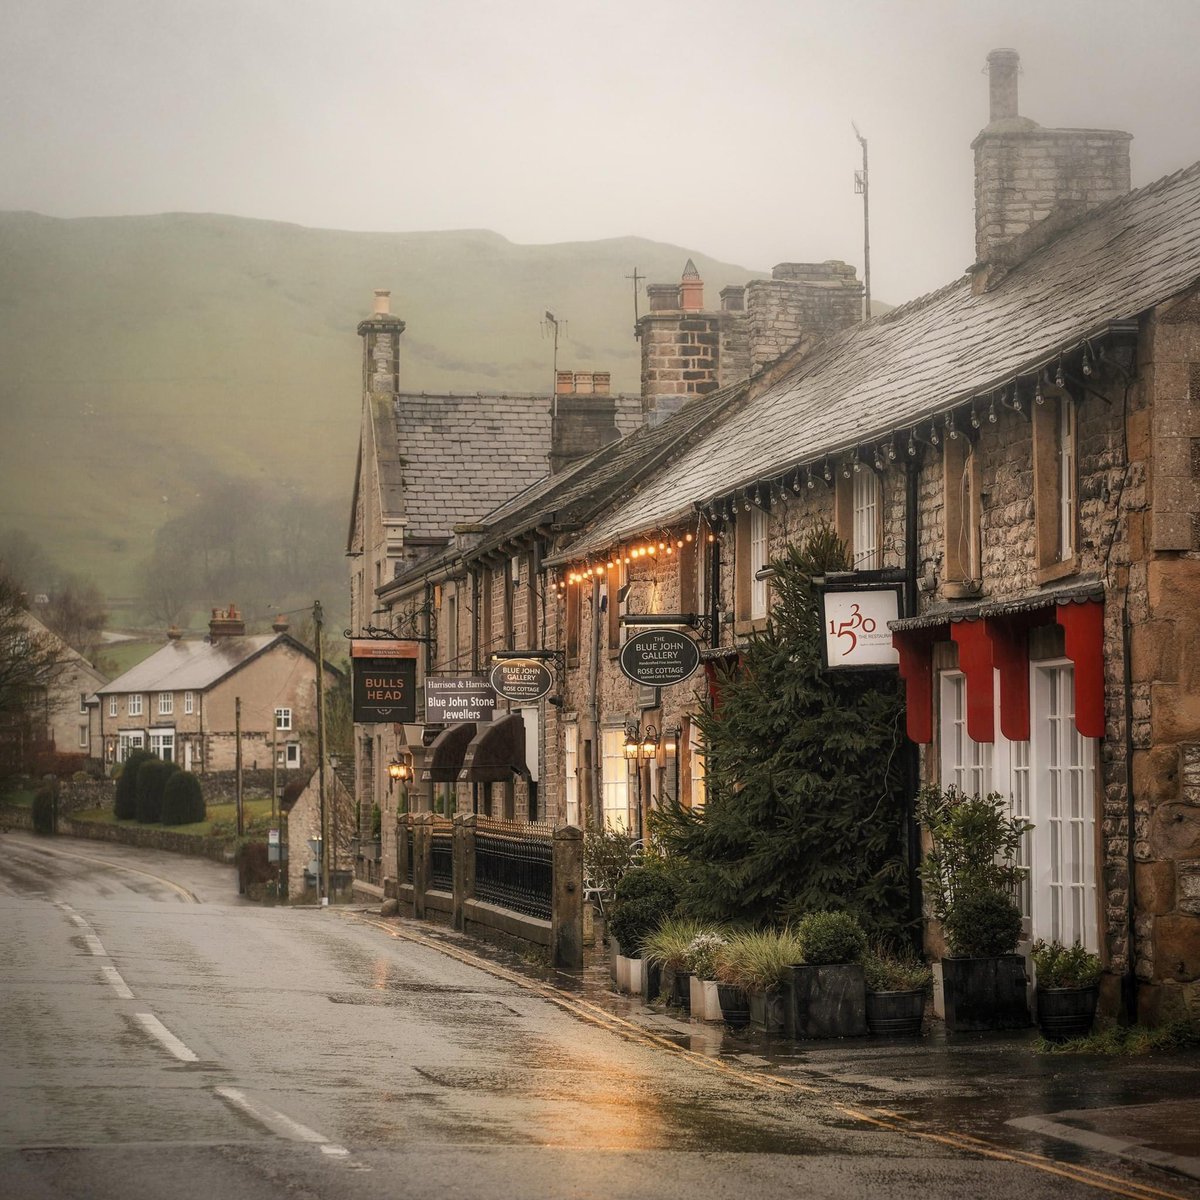 There can be too much of a good thing, I know, but there’s a real beauty in the softness of English rain. Rain that mists the air and blows in the wind, that reflects the lights and greens the hills. I think the #peakdistrict village of Castleton looks best with shining streets.